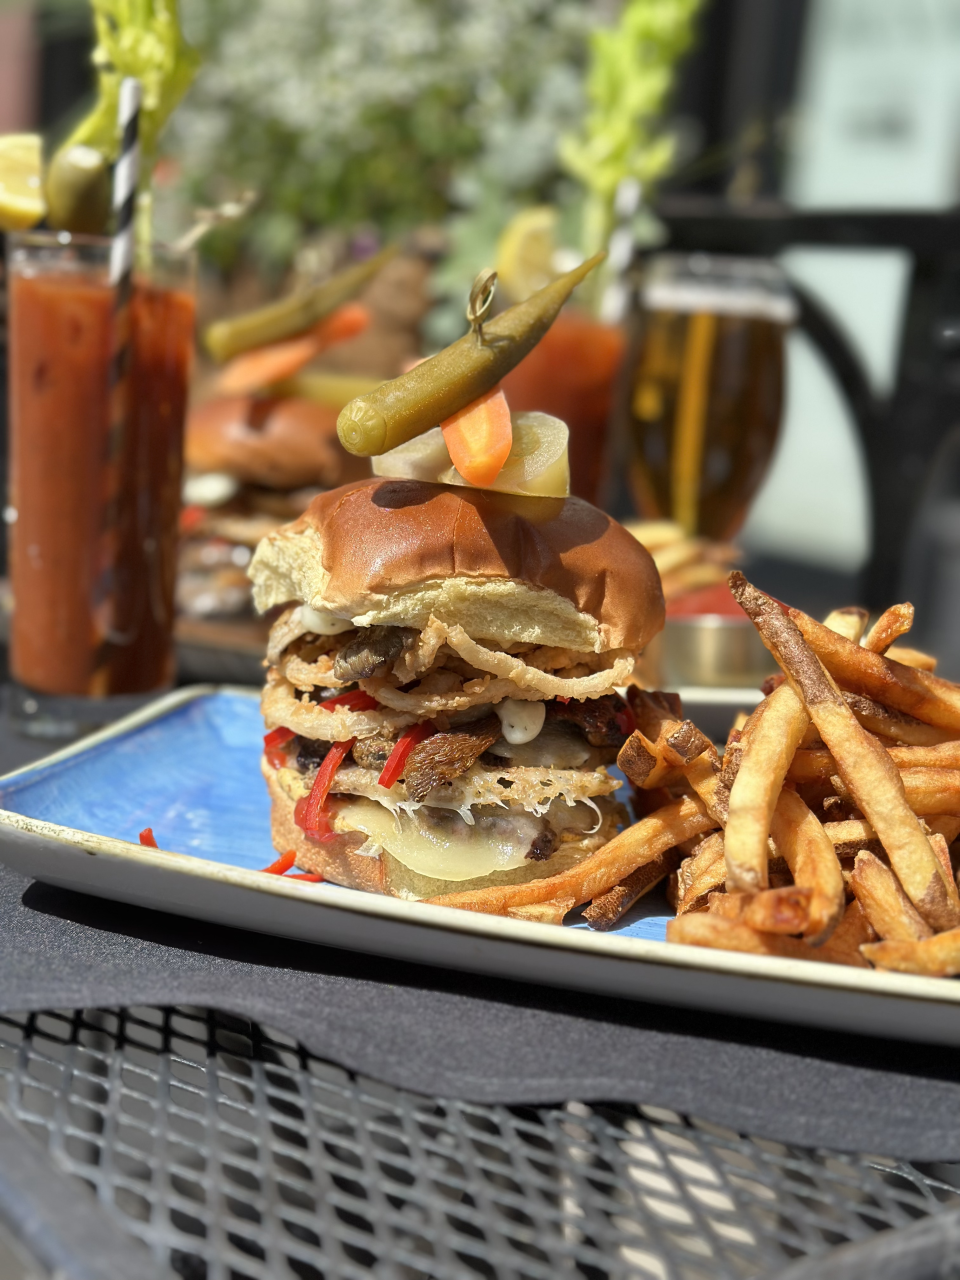 The Grand Prix Smash burger is a highlight at Besa resturant for the Grand Prix.